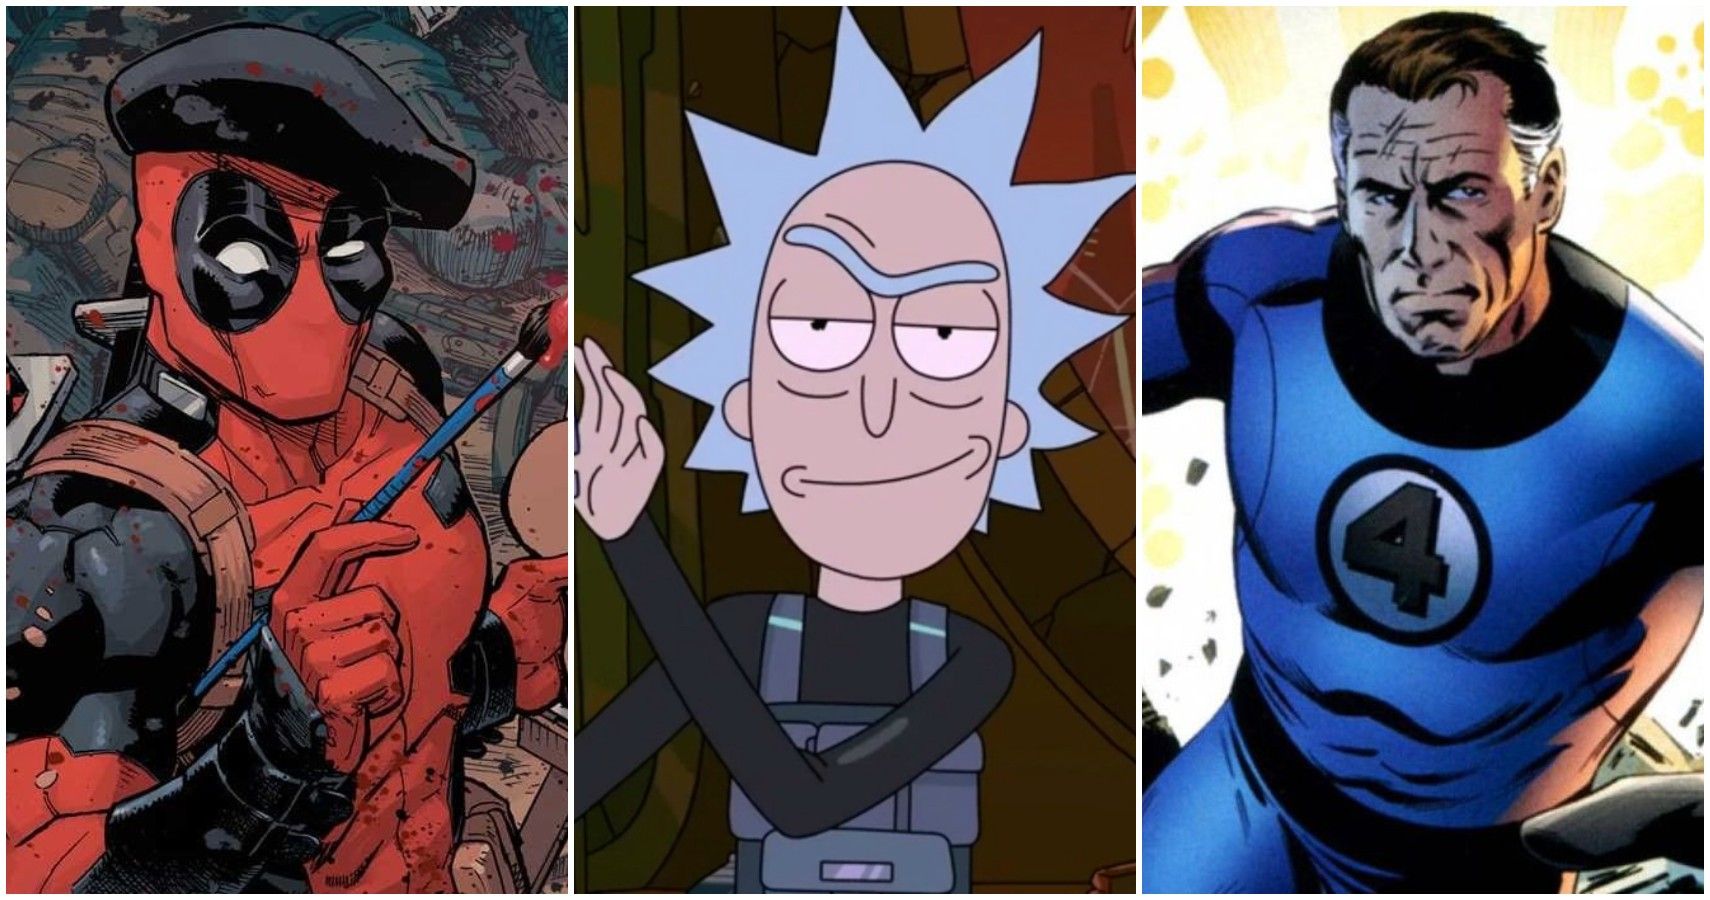 Rick and Morty television show marvel superhero action